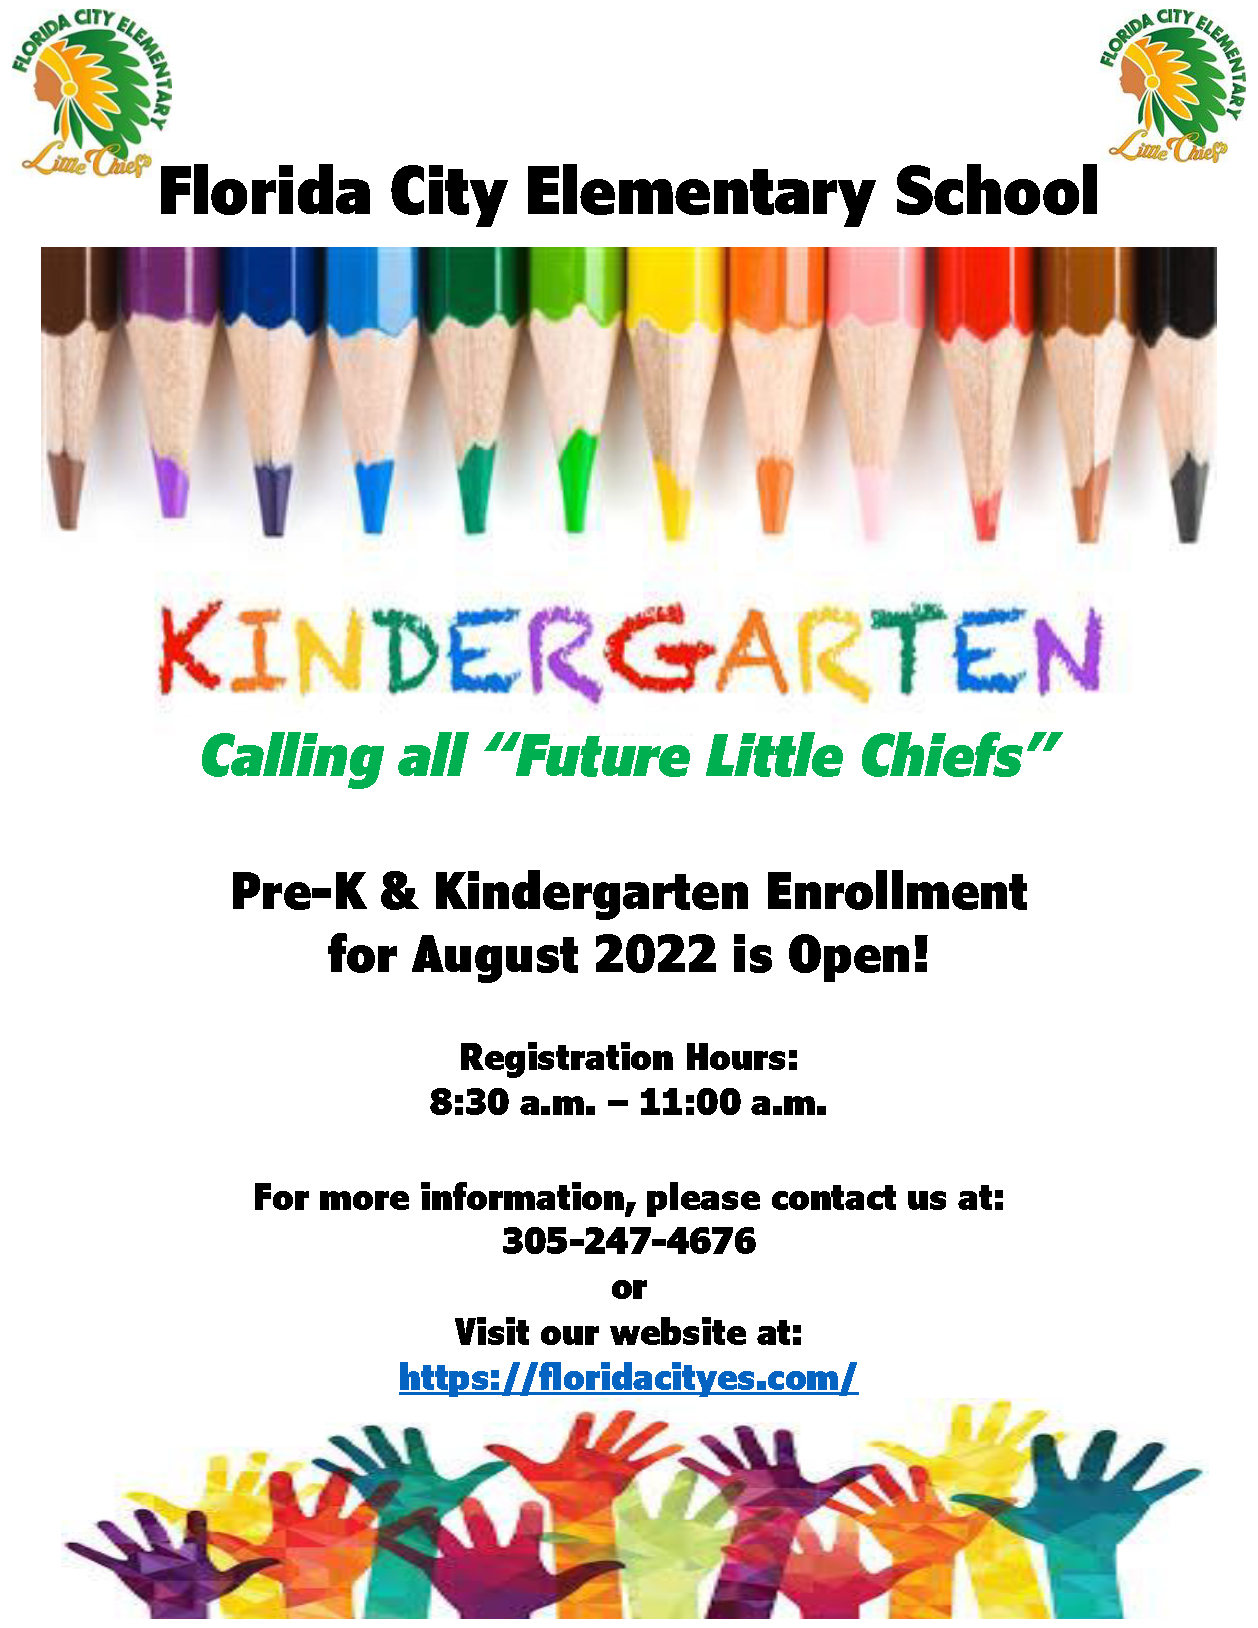 Title I South PAC 3rd Meeting – Florida City Elementary